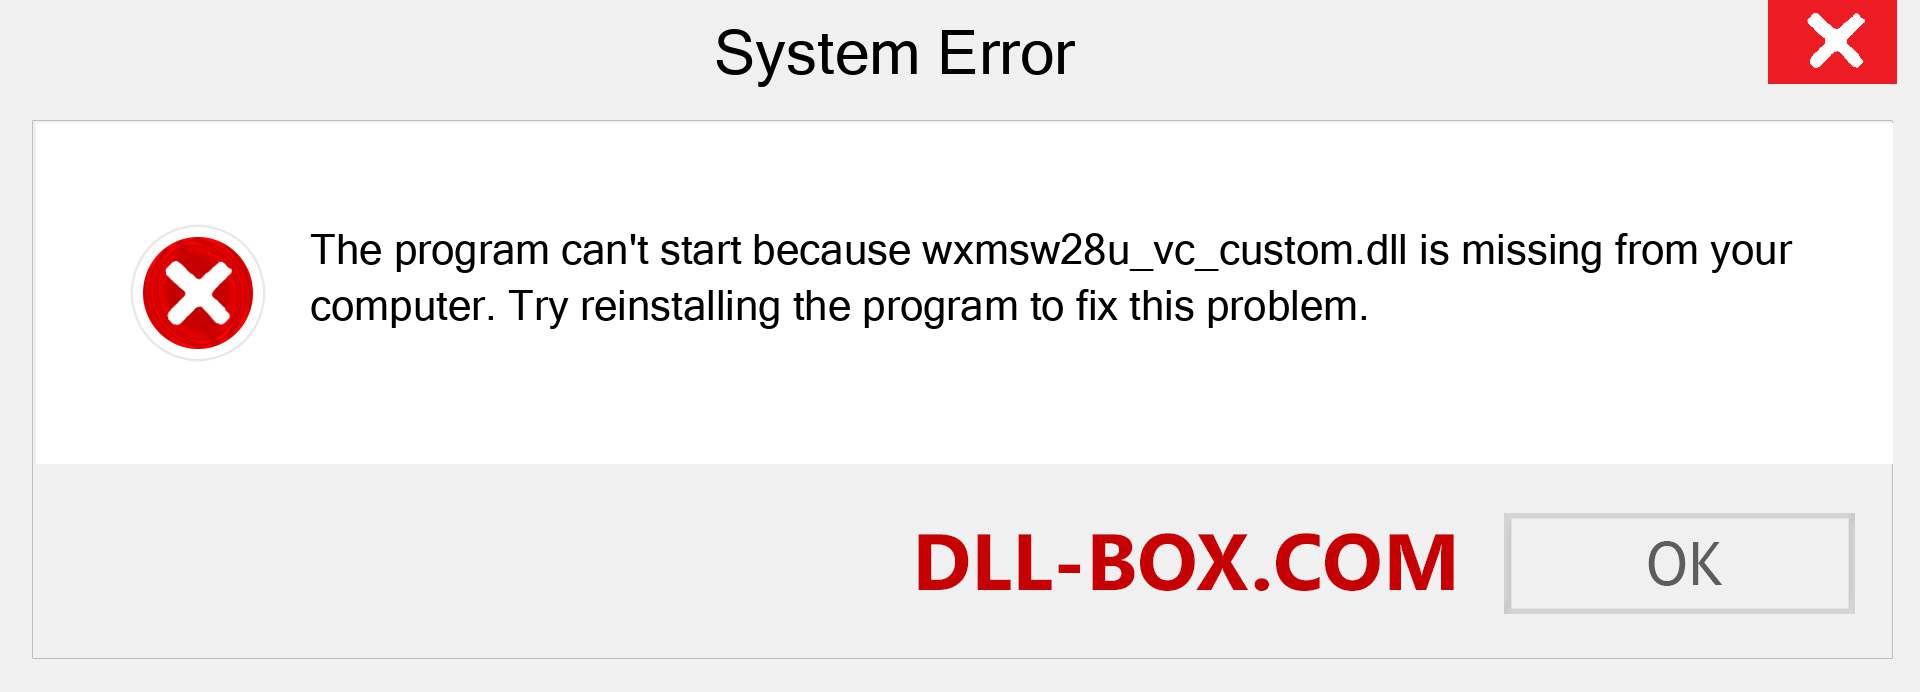  wxmsw28u_vc_custom.dll file is missing?. Download for Windows 7, 8, 10 - Fix  wxmsw28u_vc_custom dll Missing Error on Windows, photos, images